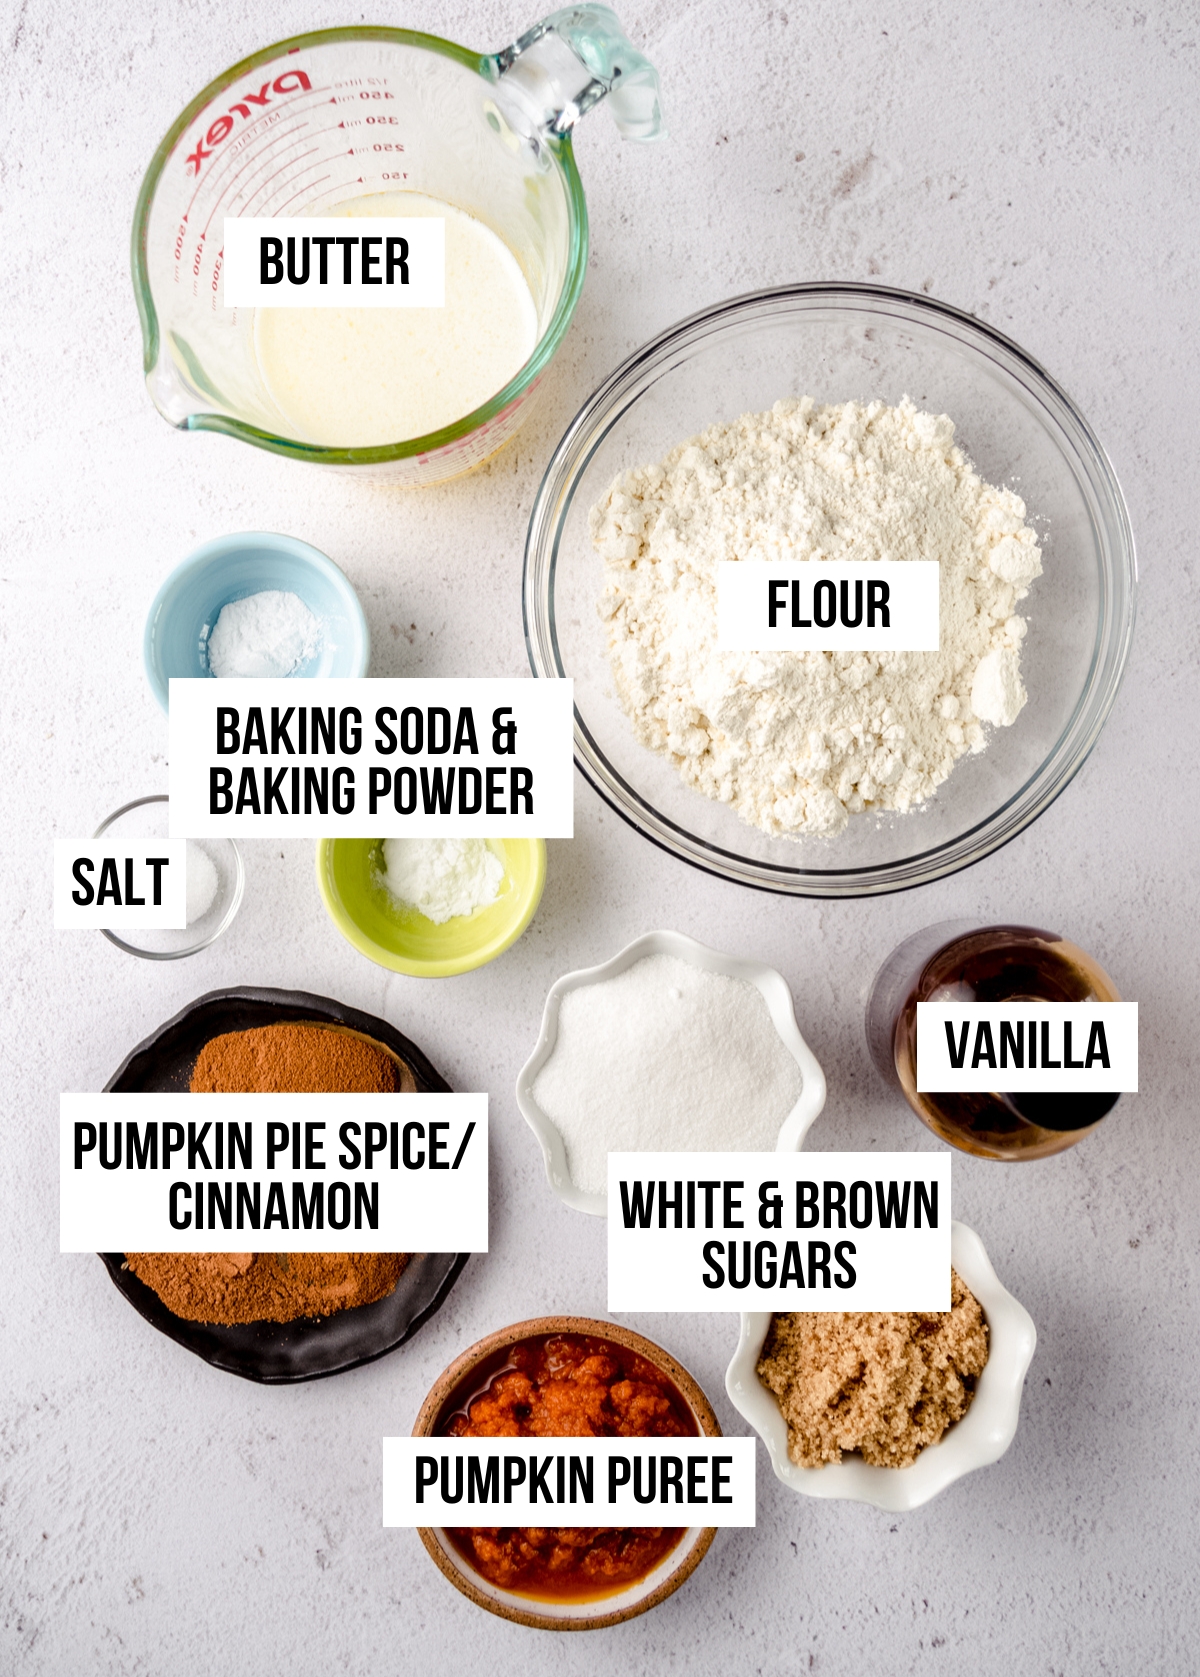 Ingredients for frosted pumpkin cookies with text overlay.